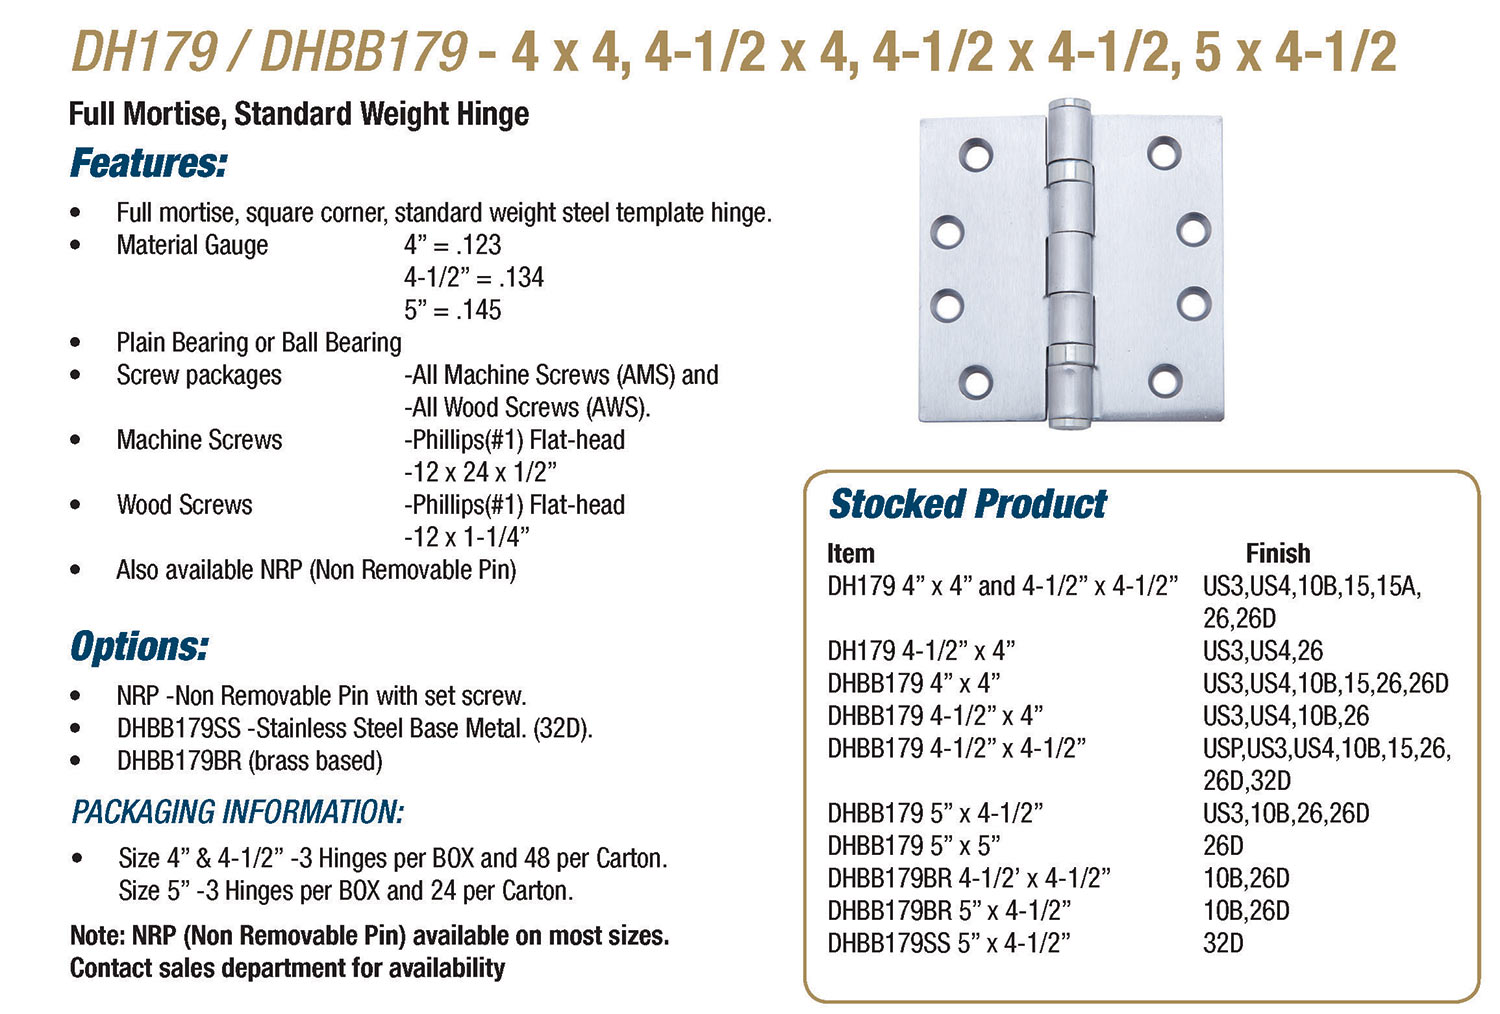 Doormerica Commercial Hinges 4-1/2" x 4-1/2",DH-BB179,D-42 Ball Bearing 